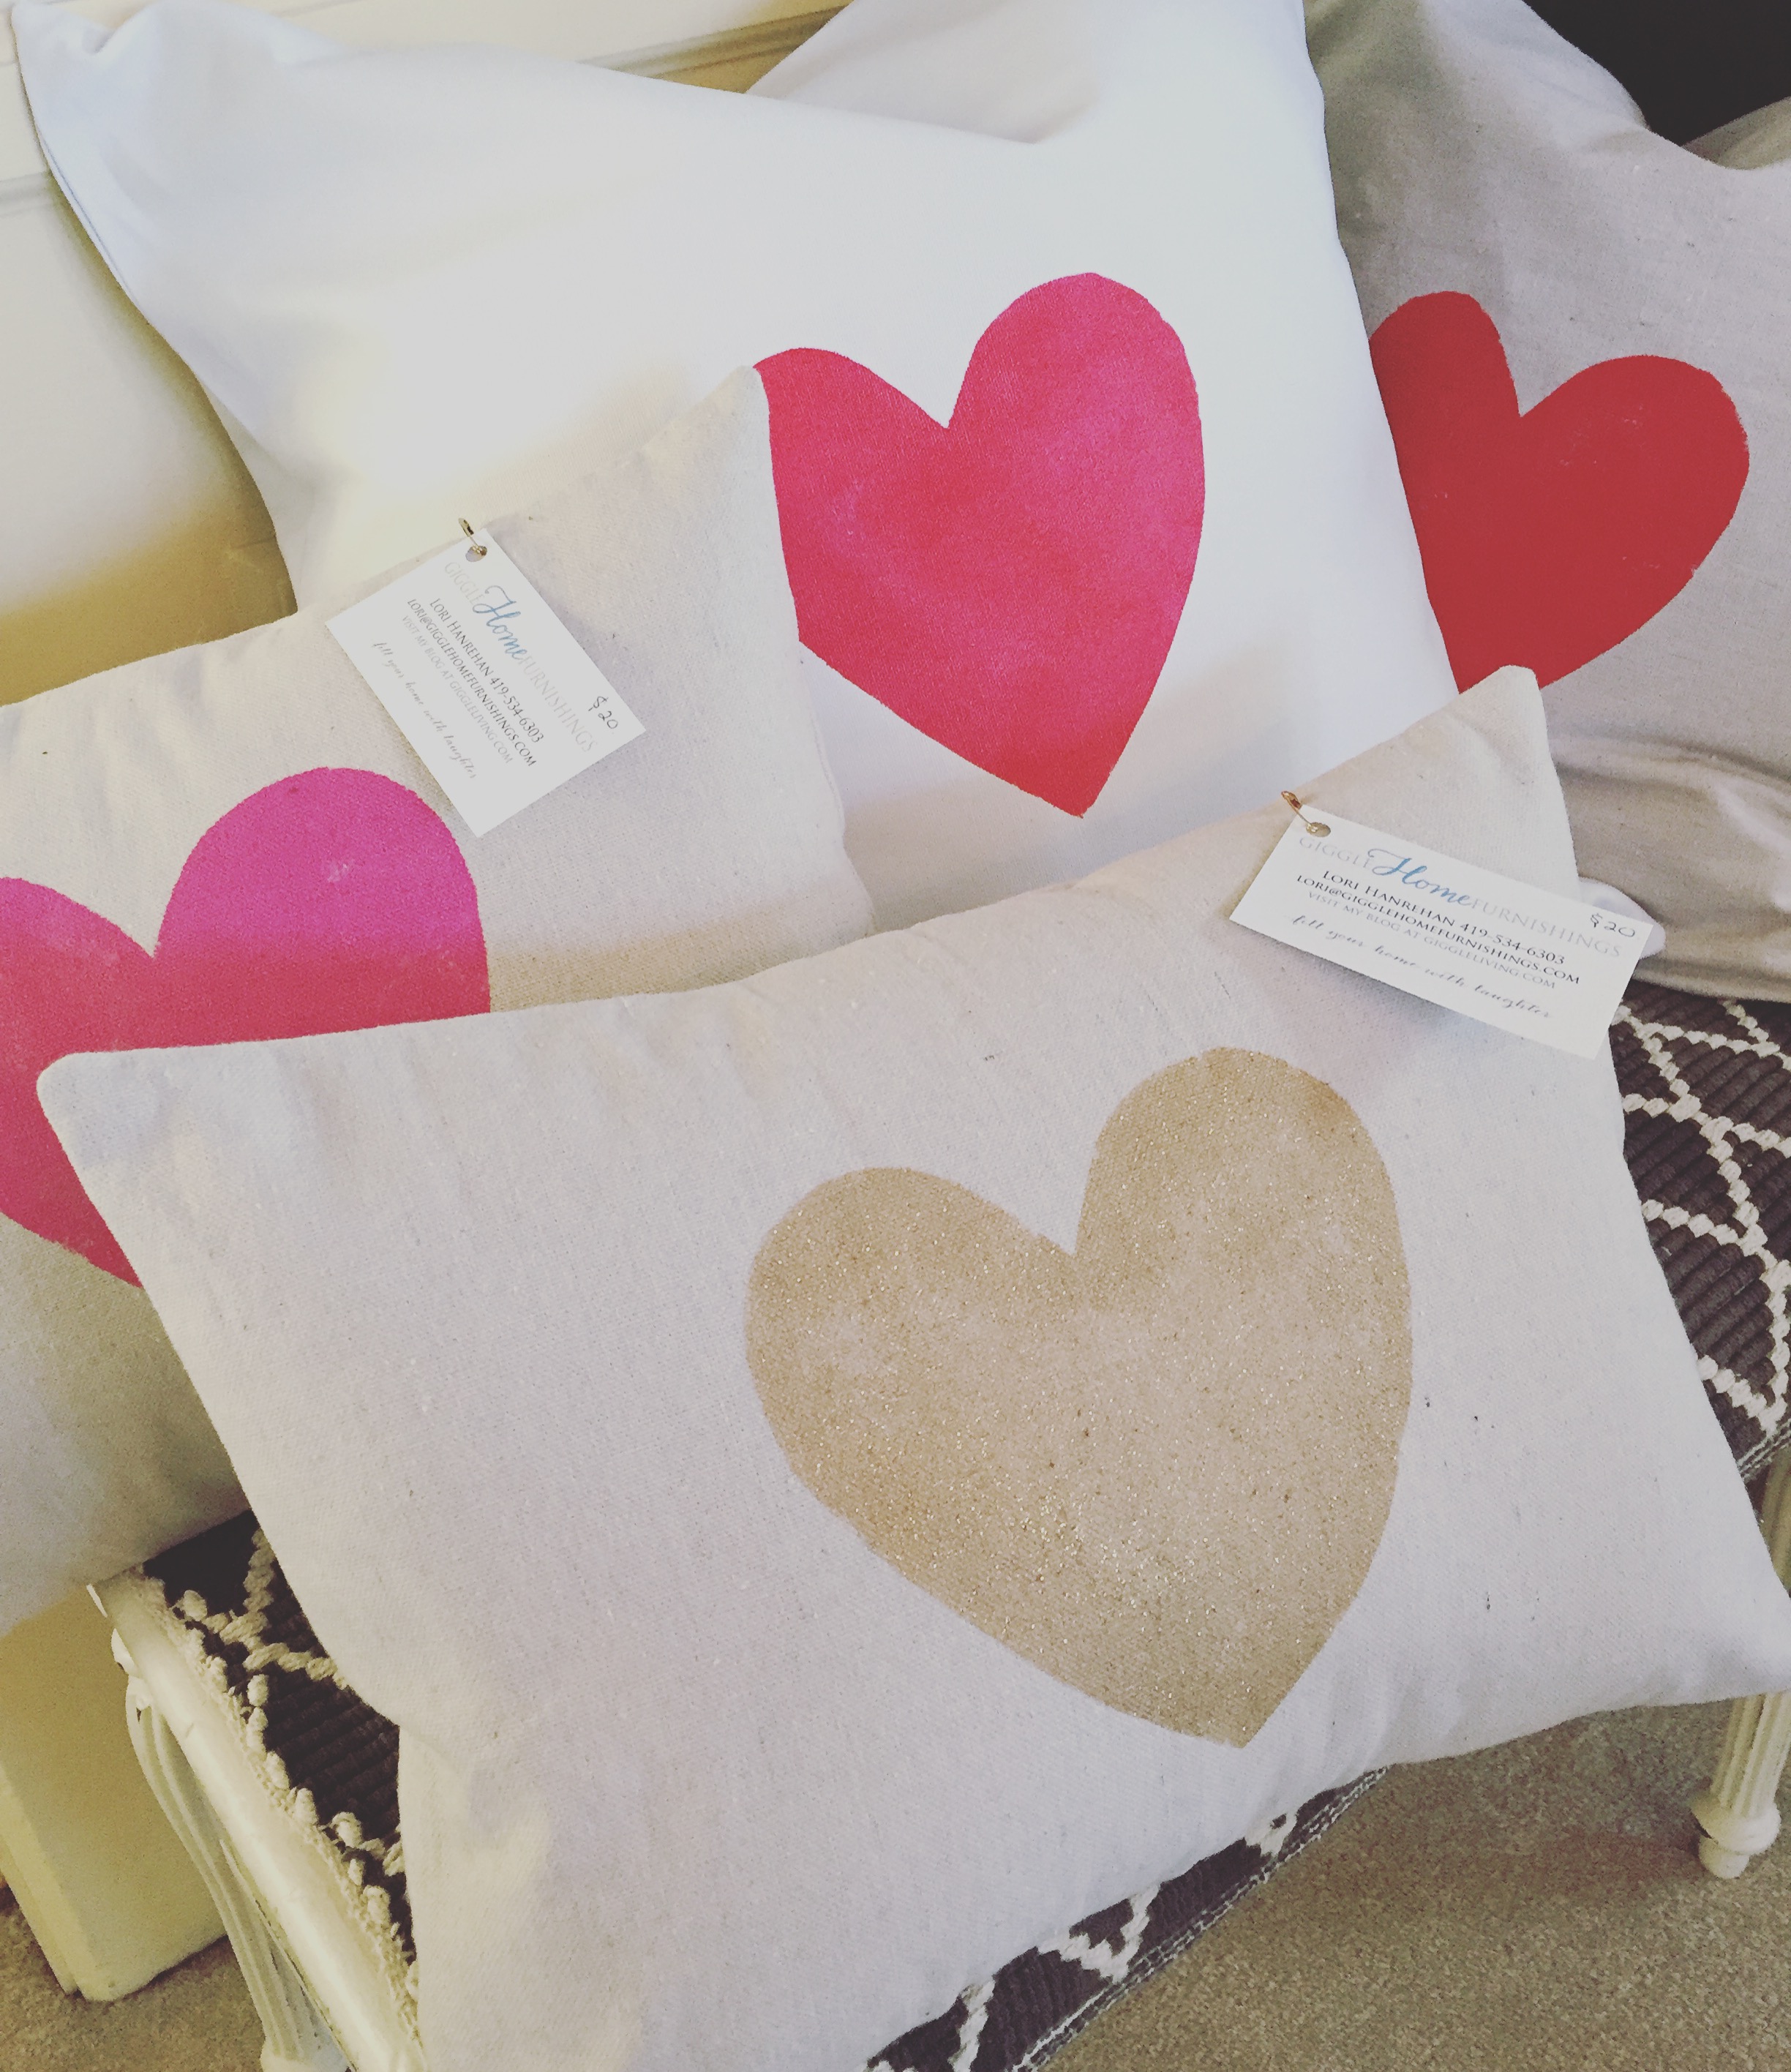 Giggle painted pillows